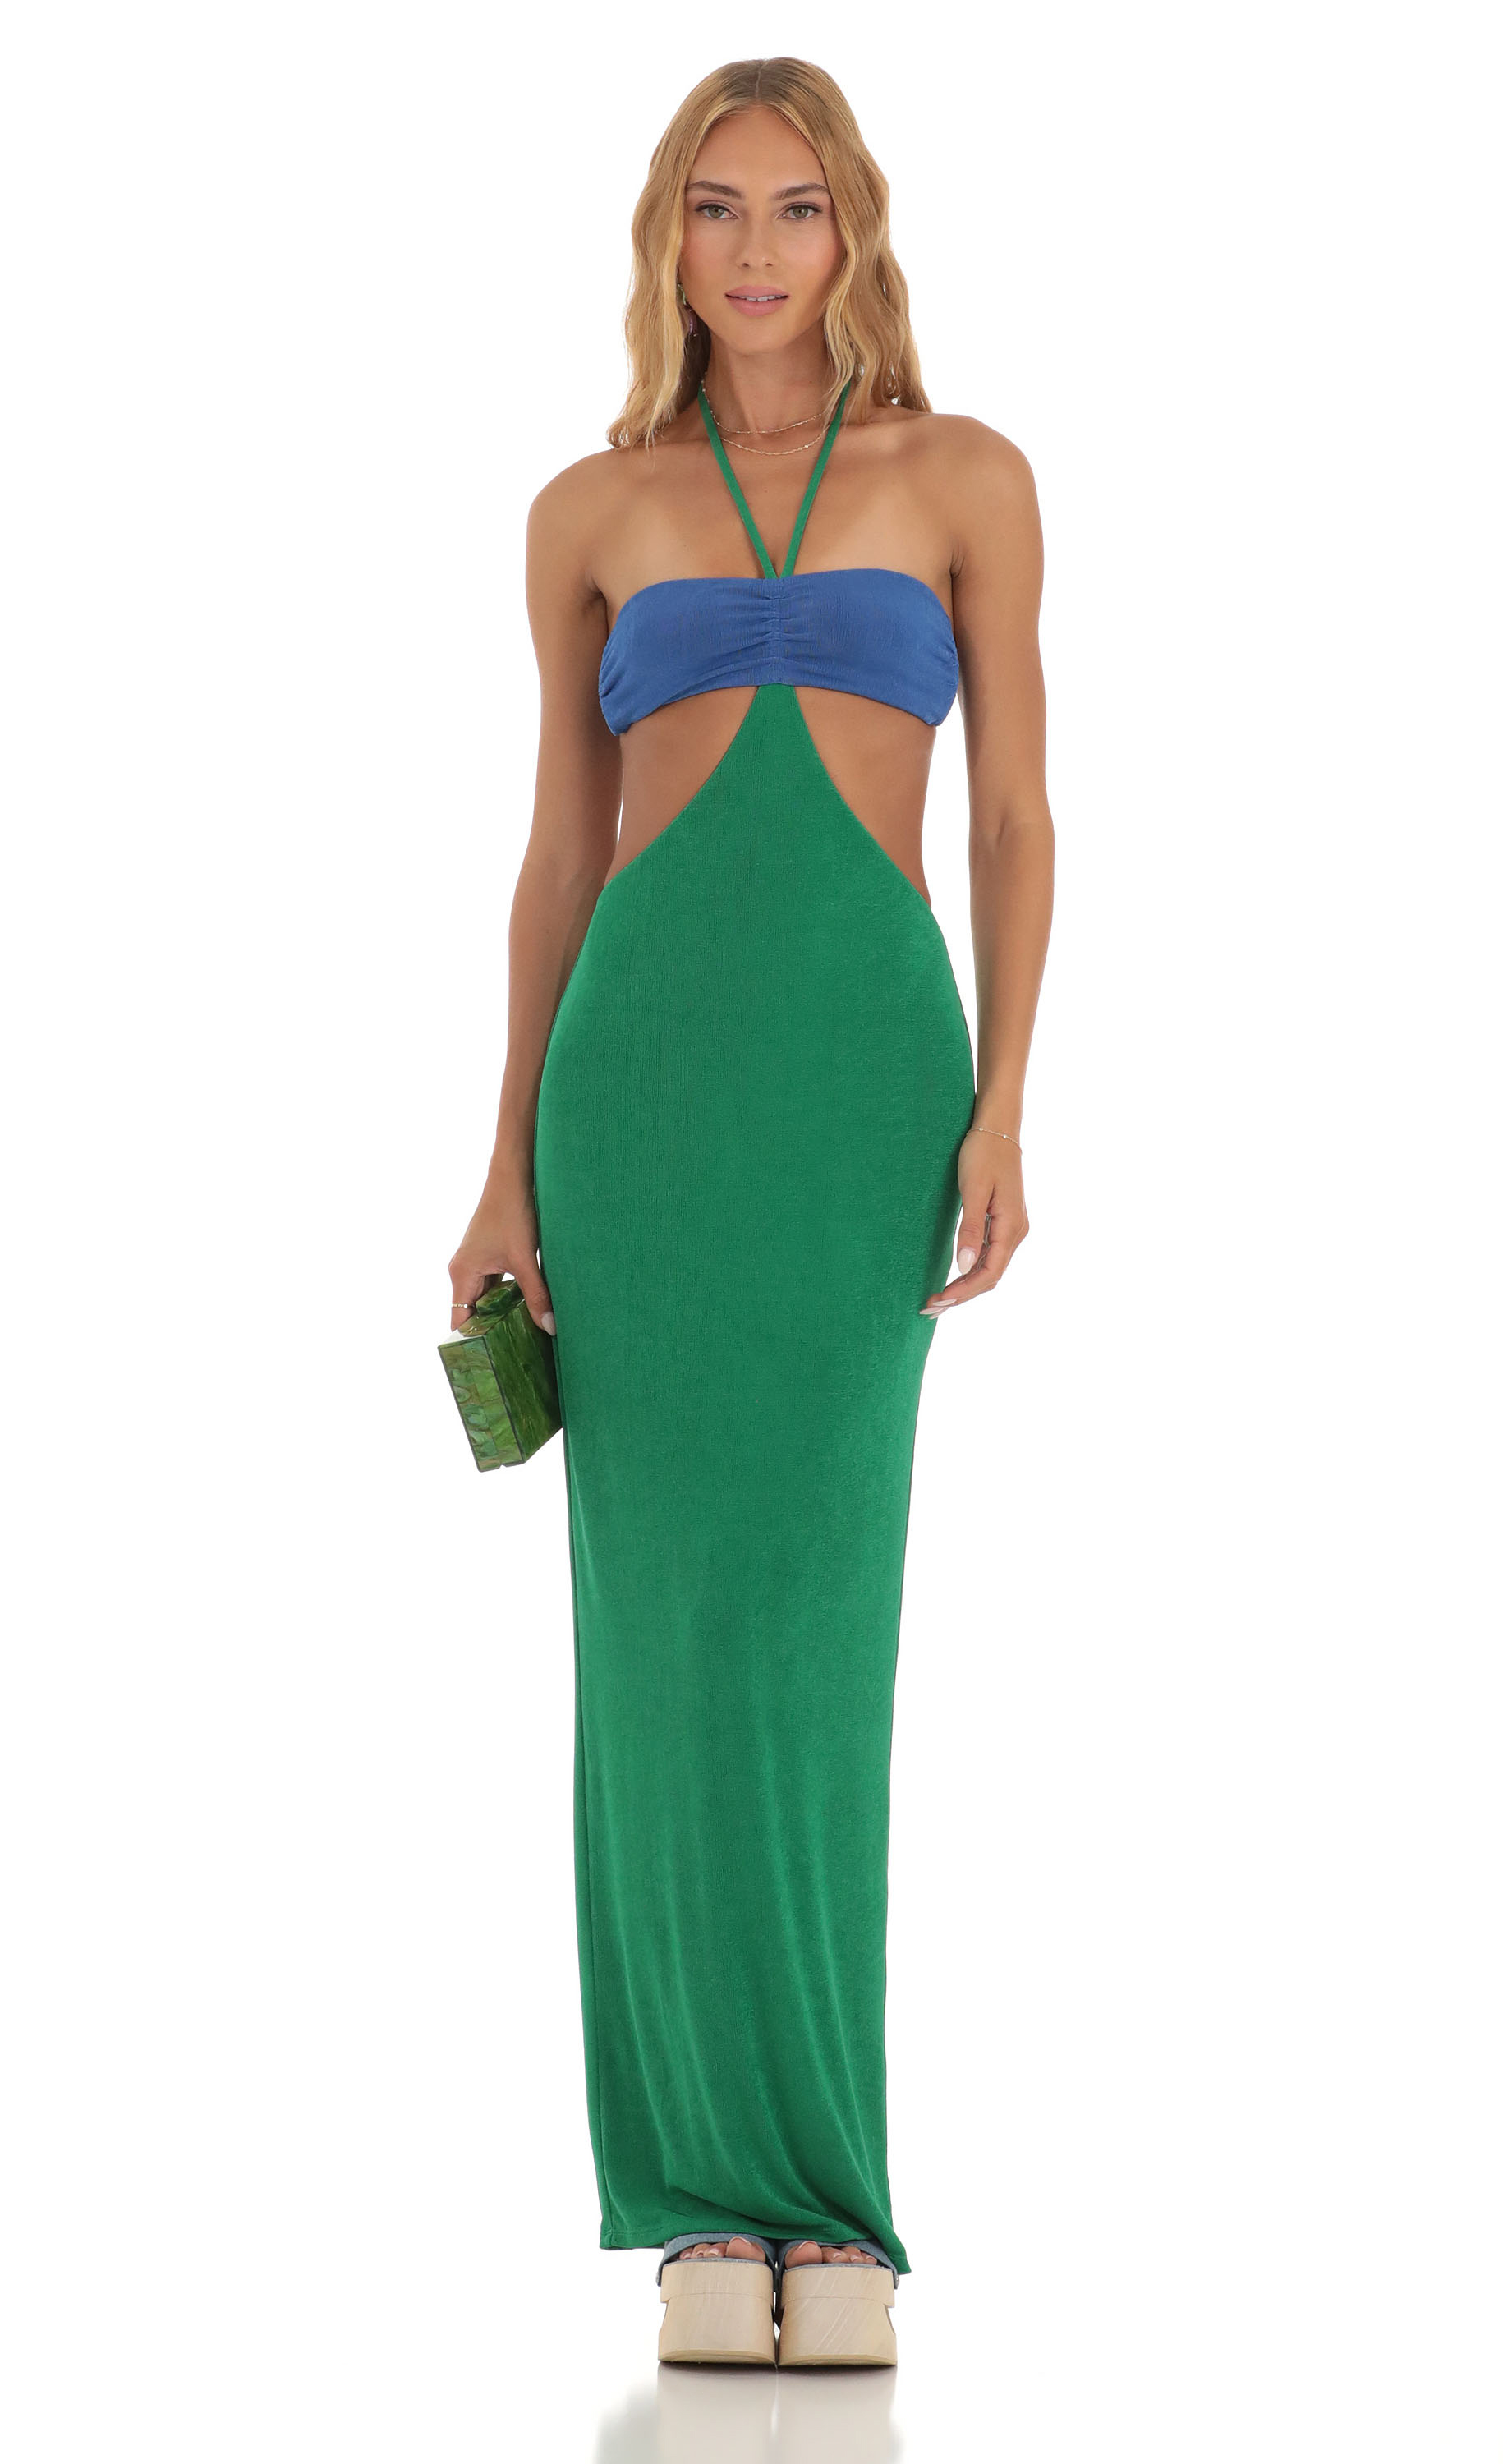 Two Toned Cutout Maxi Dress in Blue and Green